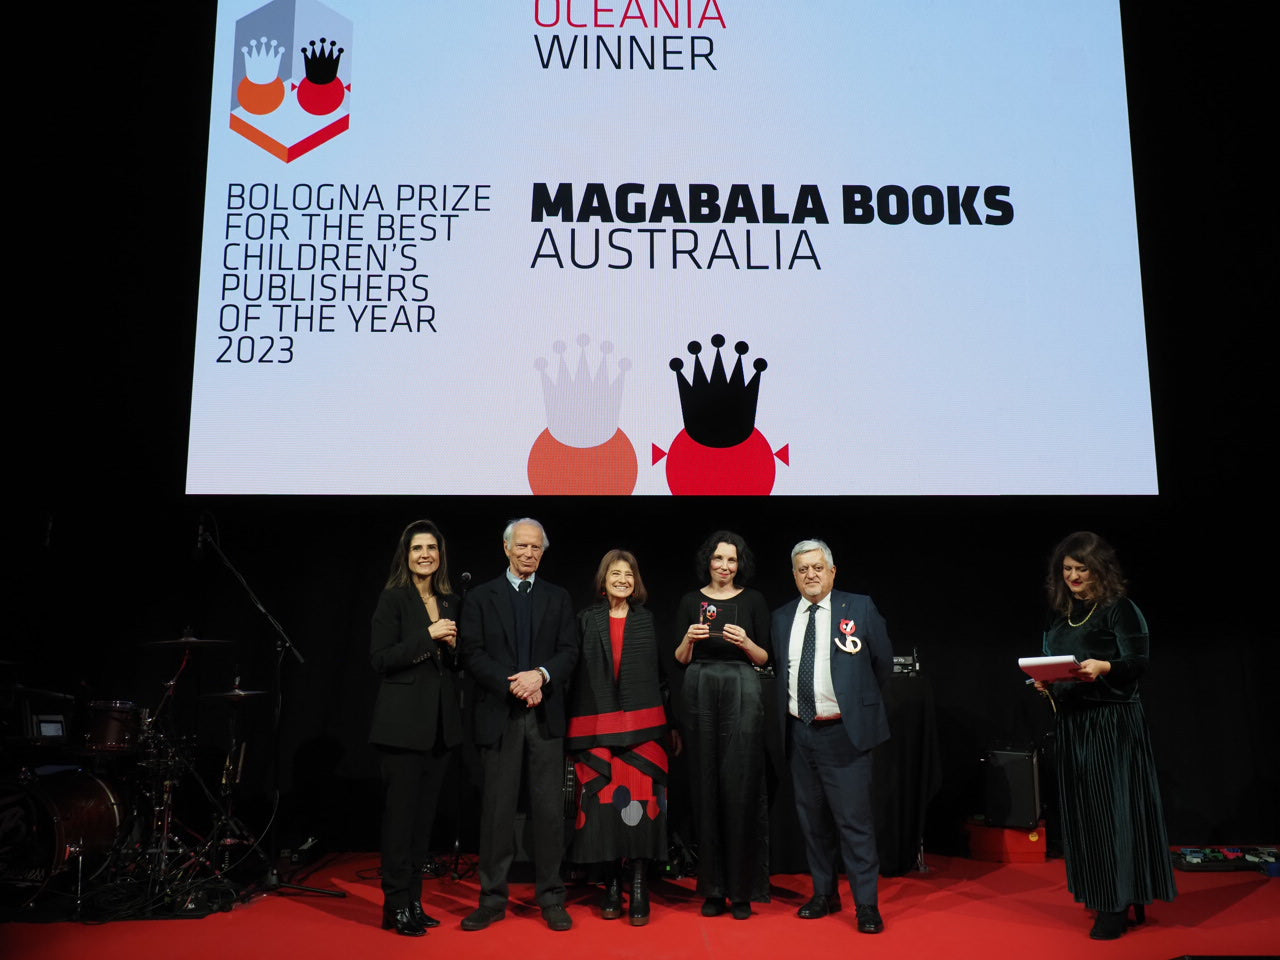  Magabala Books Bologna Prize for the Best Children’s Publishers of the Year, Oceania Region